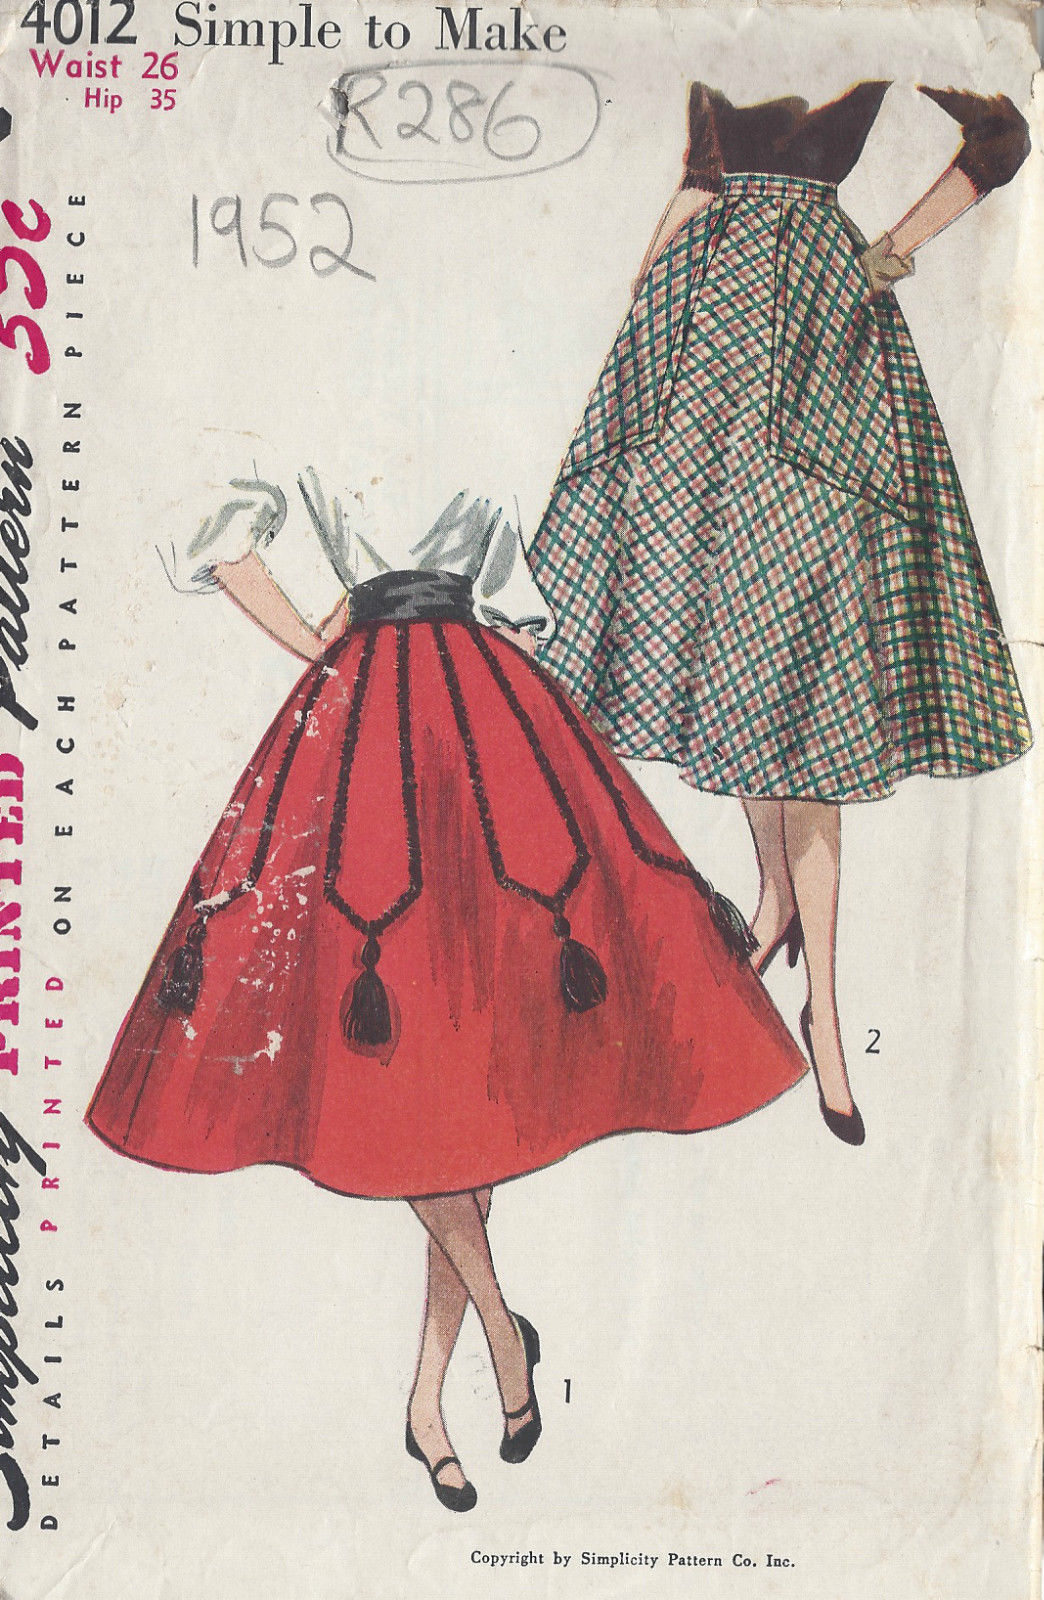 1950s Skirt Pattern available from The Vintage Pattern Shop